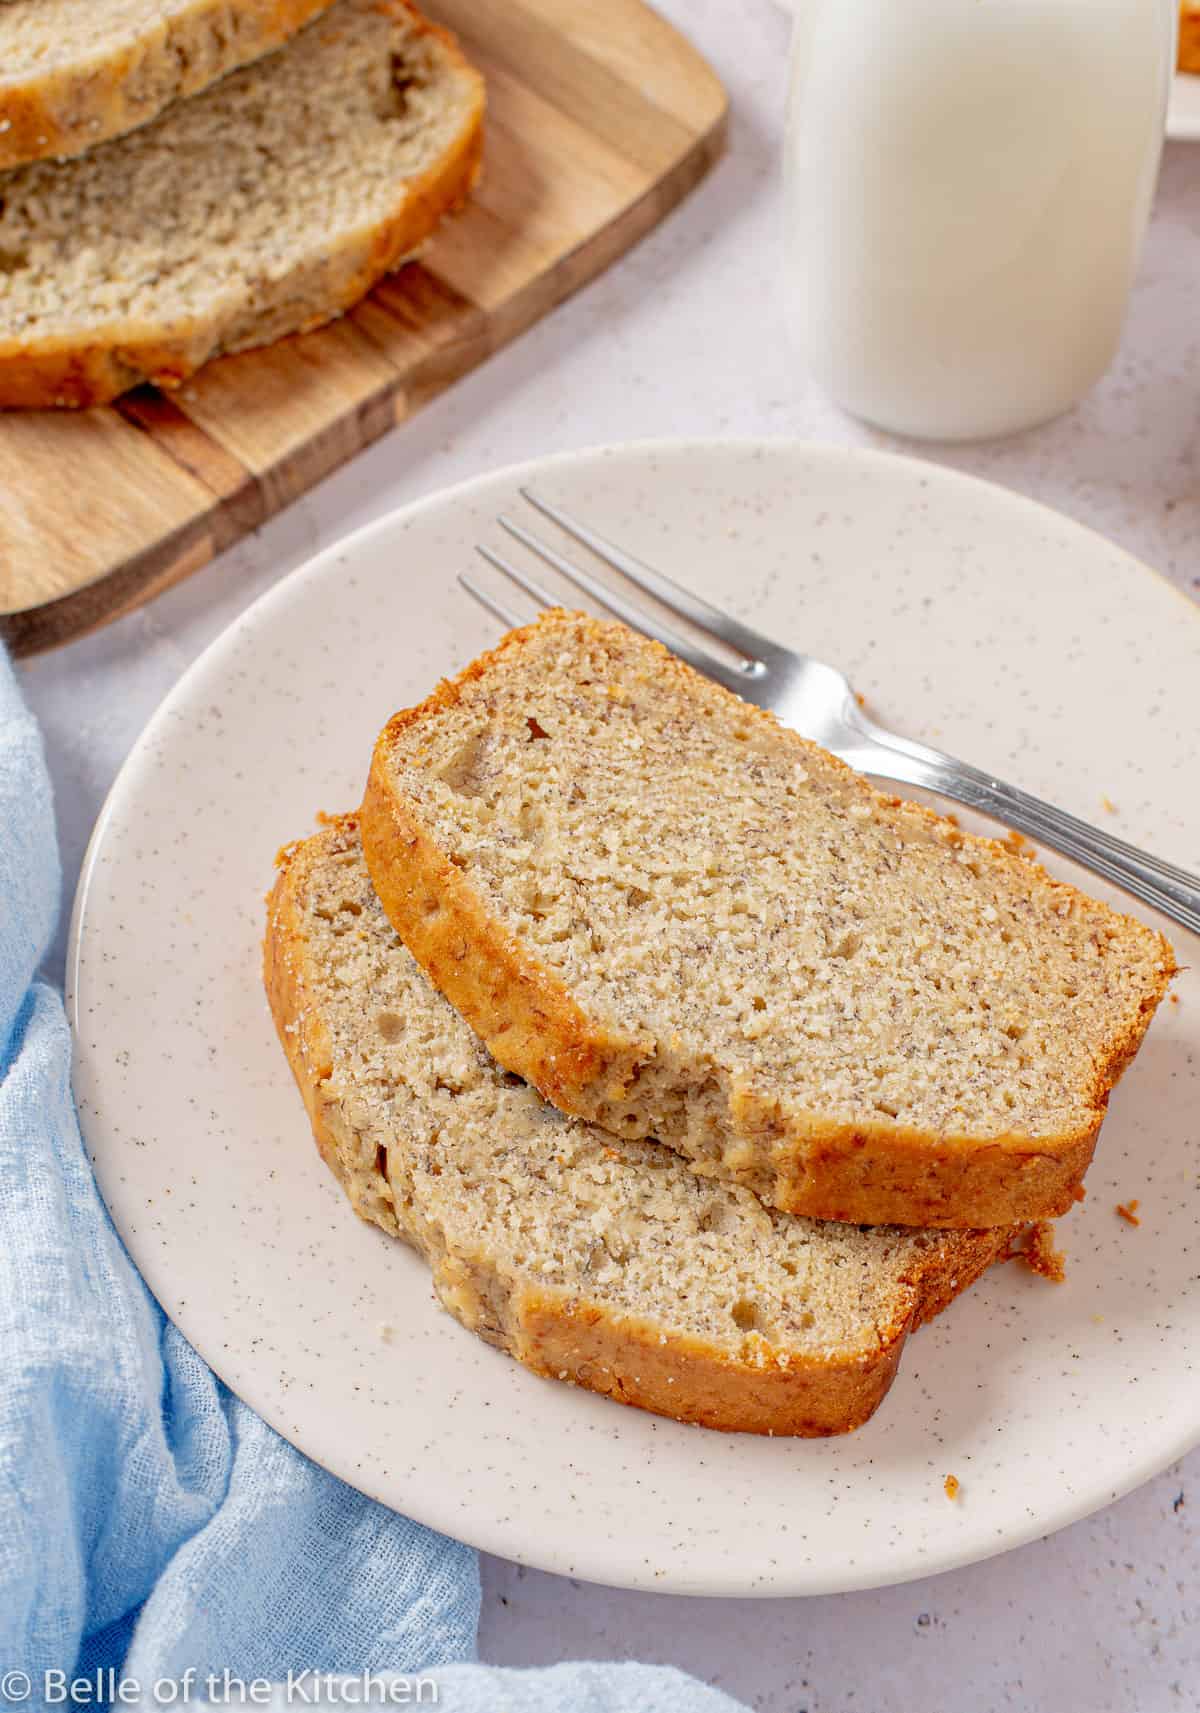 slices of banana bread on a plate next to a fork